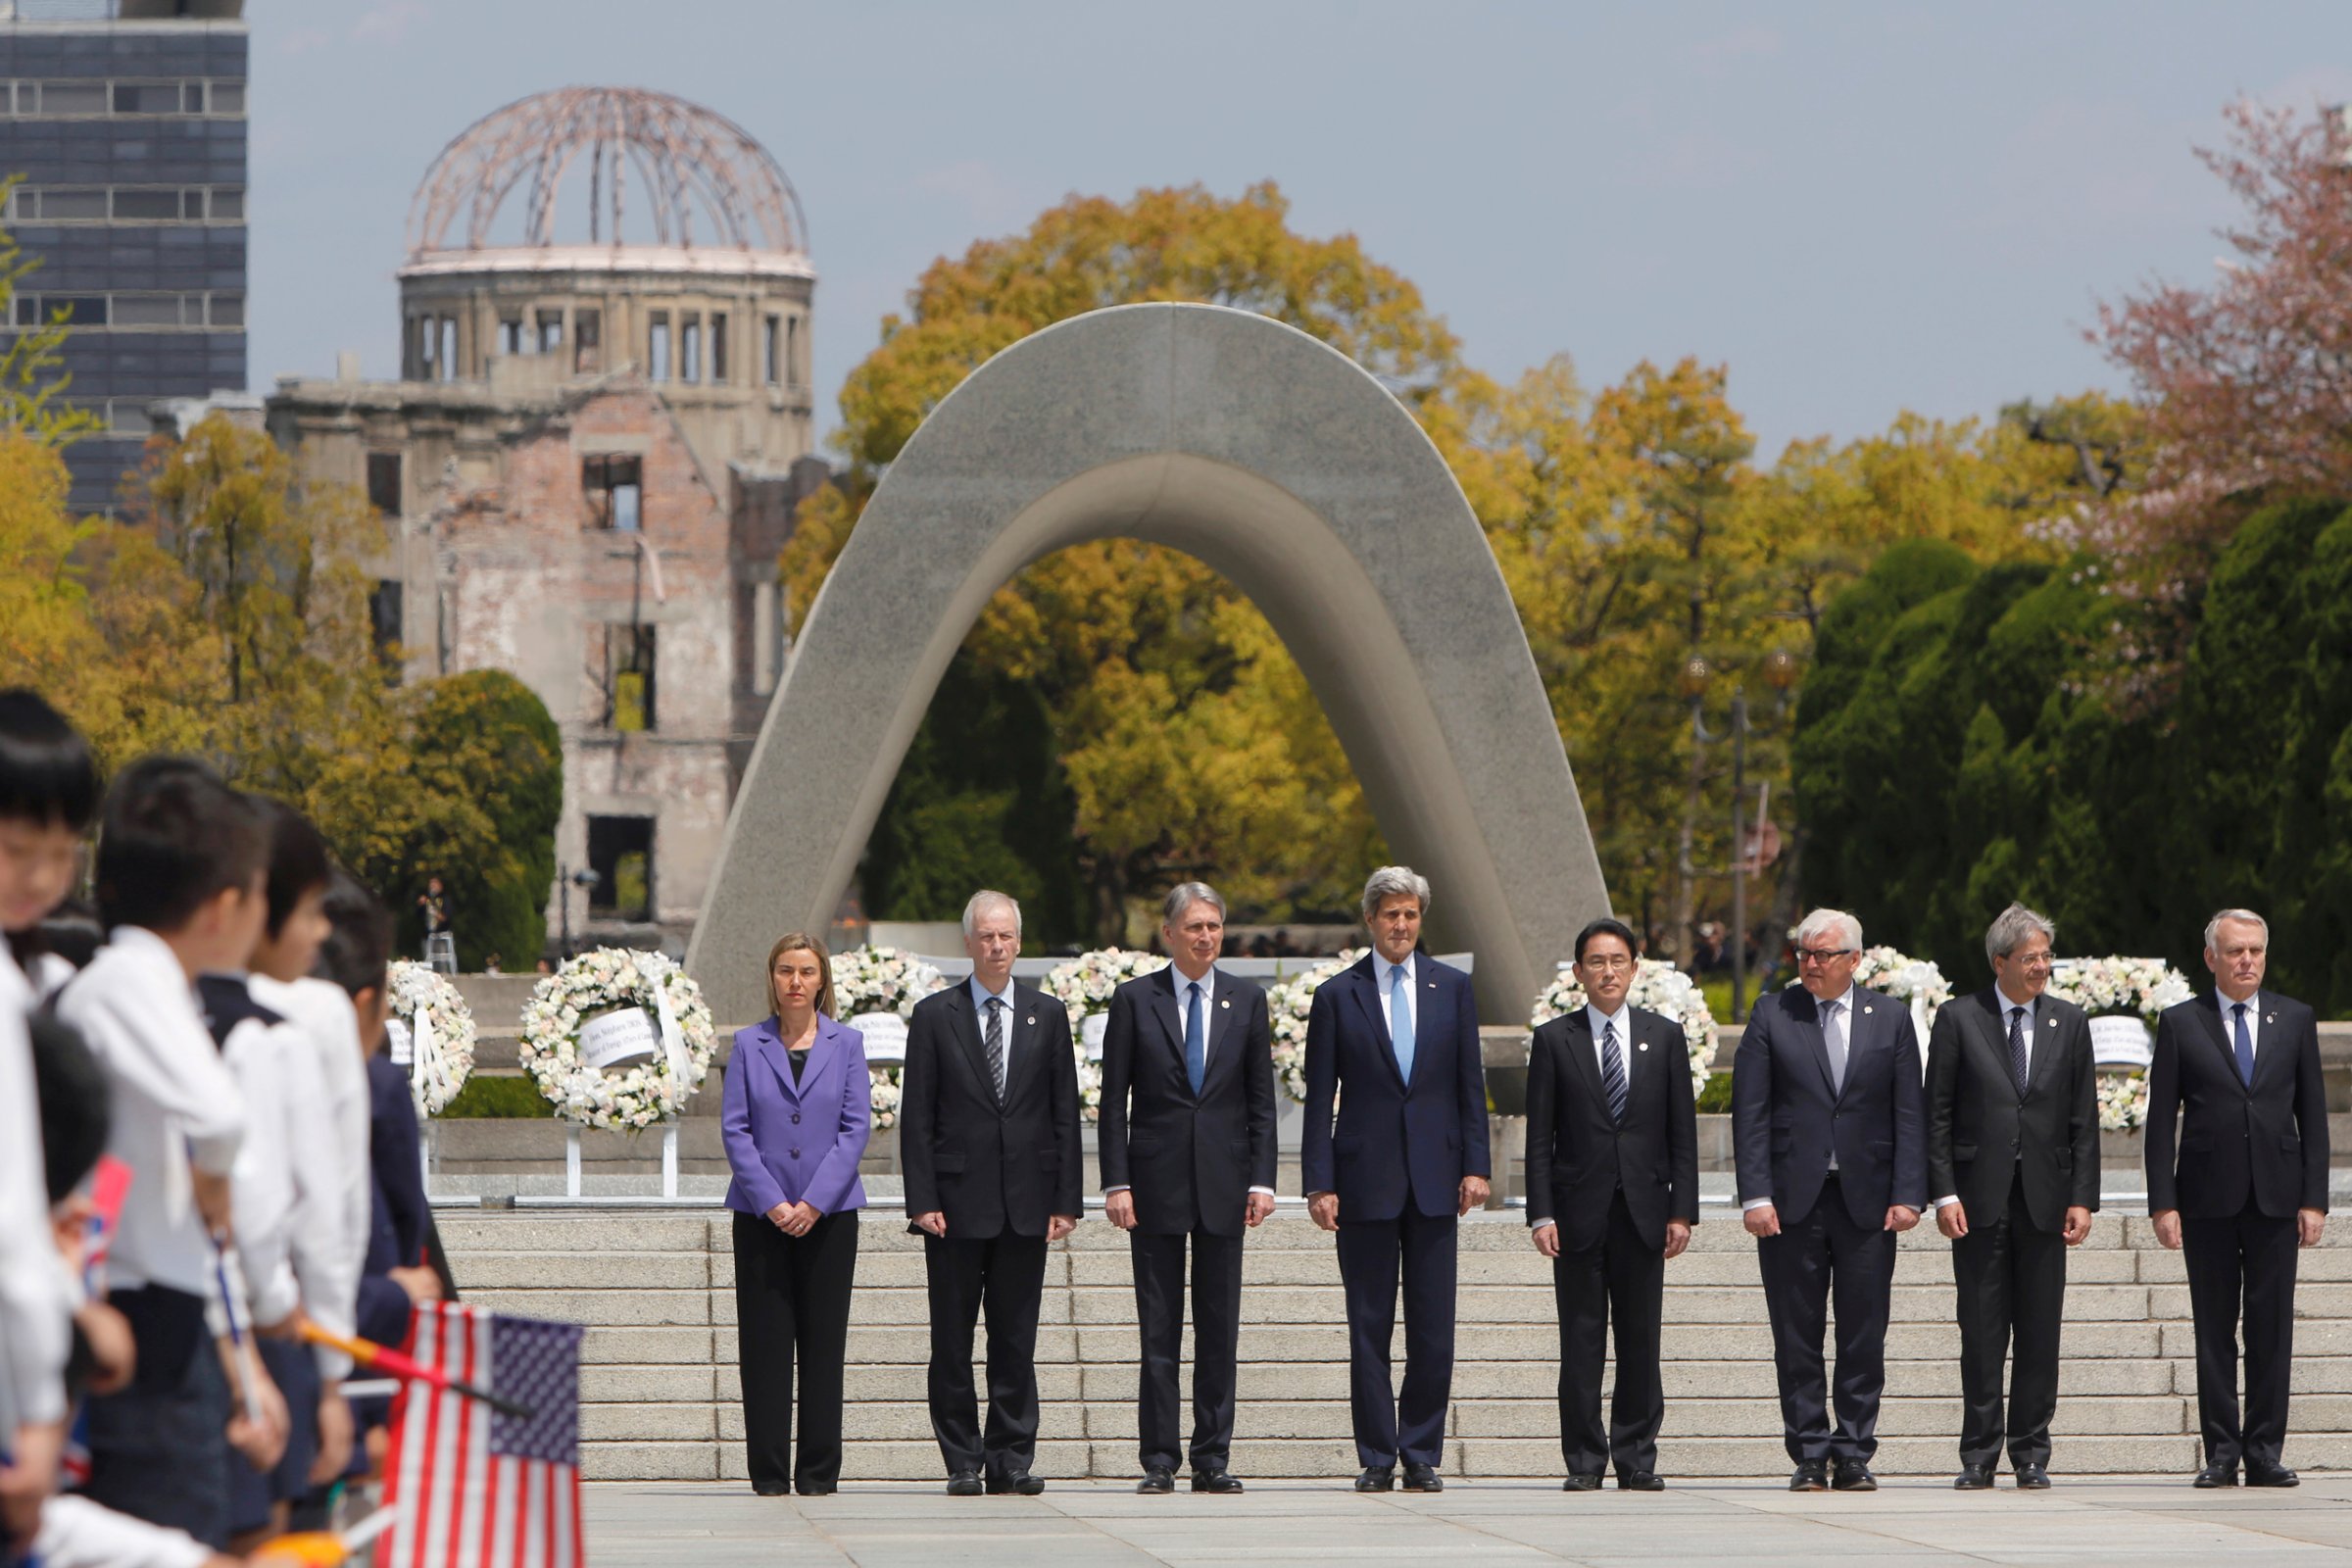 G7 foreign ministers stand together after placing wreaths at the cenotaph at Hiroshima Peace Memorial Park in Hiroshima, western Japan on April 11, 2016. Pictured from left are E.U. High Representative for Foreign Affairs Federica Mogherini, Canada's Foreign Minister Stephane Dion, Britain's Foreign Minister Philip Hammond, U.S. Secretary of State John Kerry, Japan's Foreign Minister Fumio Kishida, Germany's Foreign Minister Frank-Walter Steinmeier, Italy's Foreign Minister Paolo Gentiloni and France's Foreign Minister Jean-Marc Ayrault.